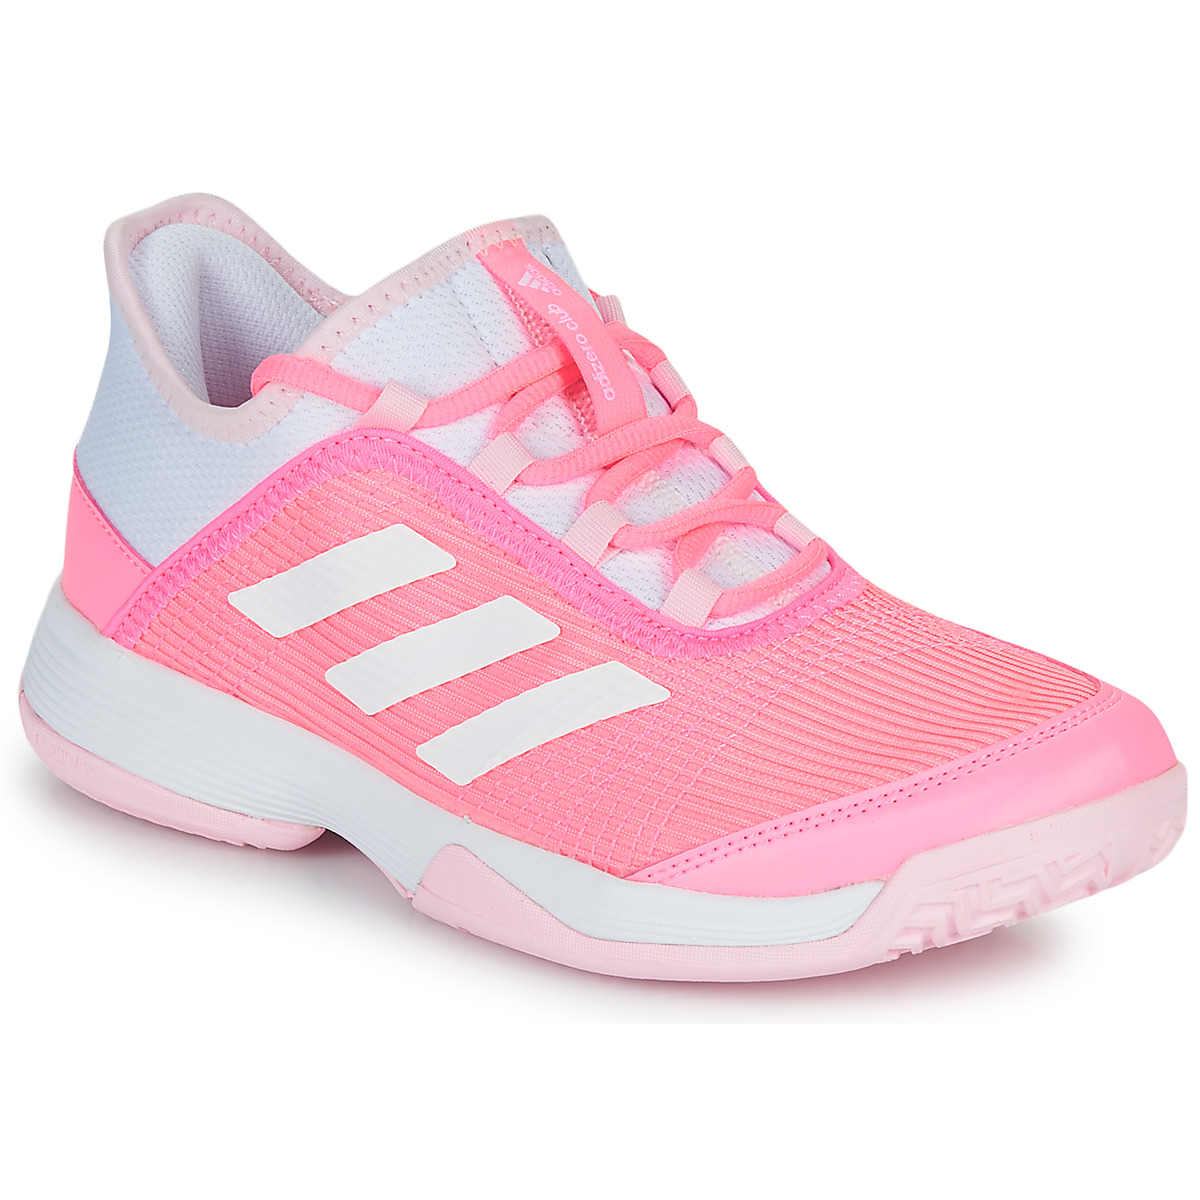 NWT U.S. Polo Assn. Childrens shoes Pink girls Size 12